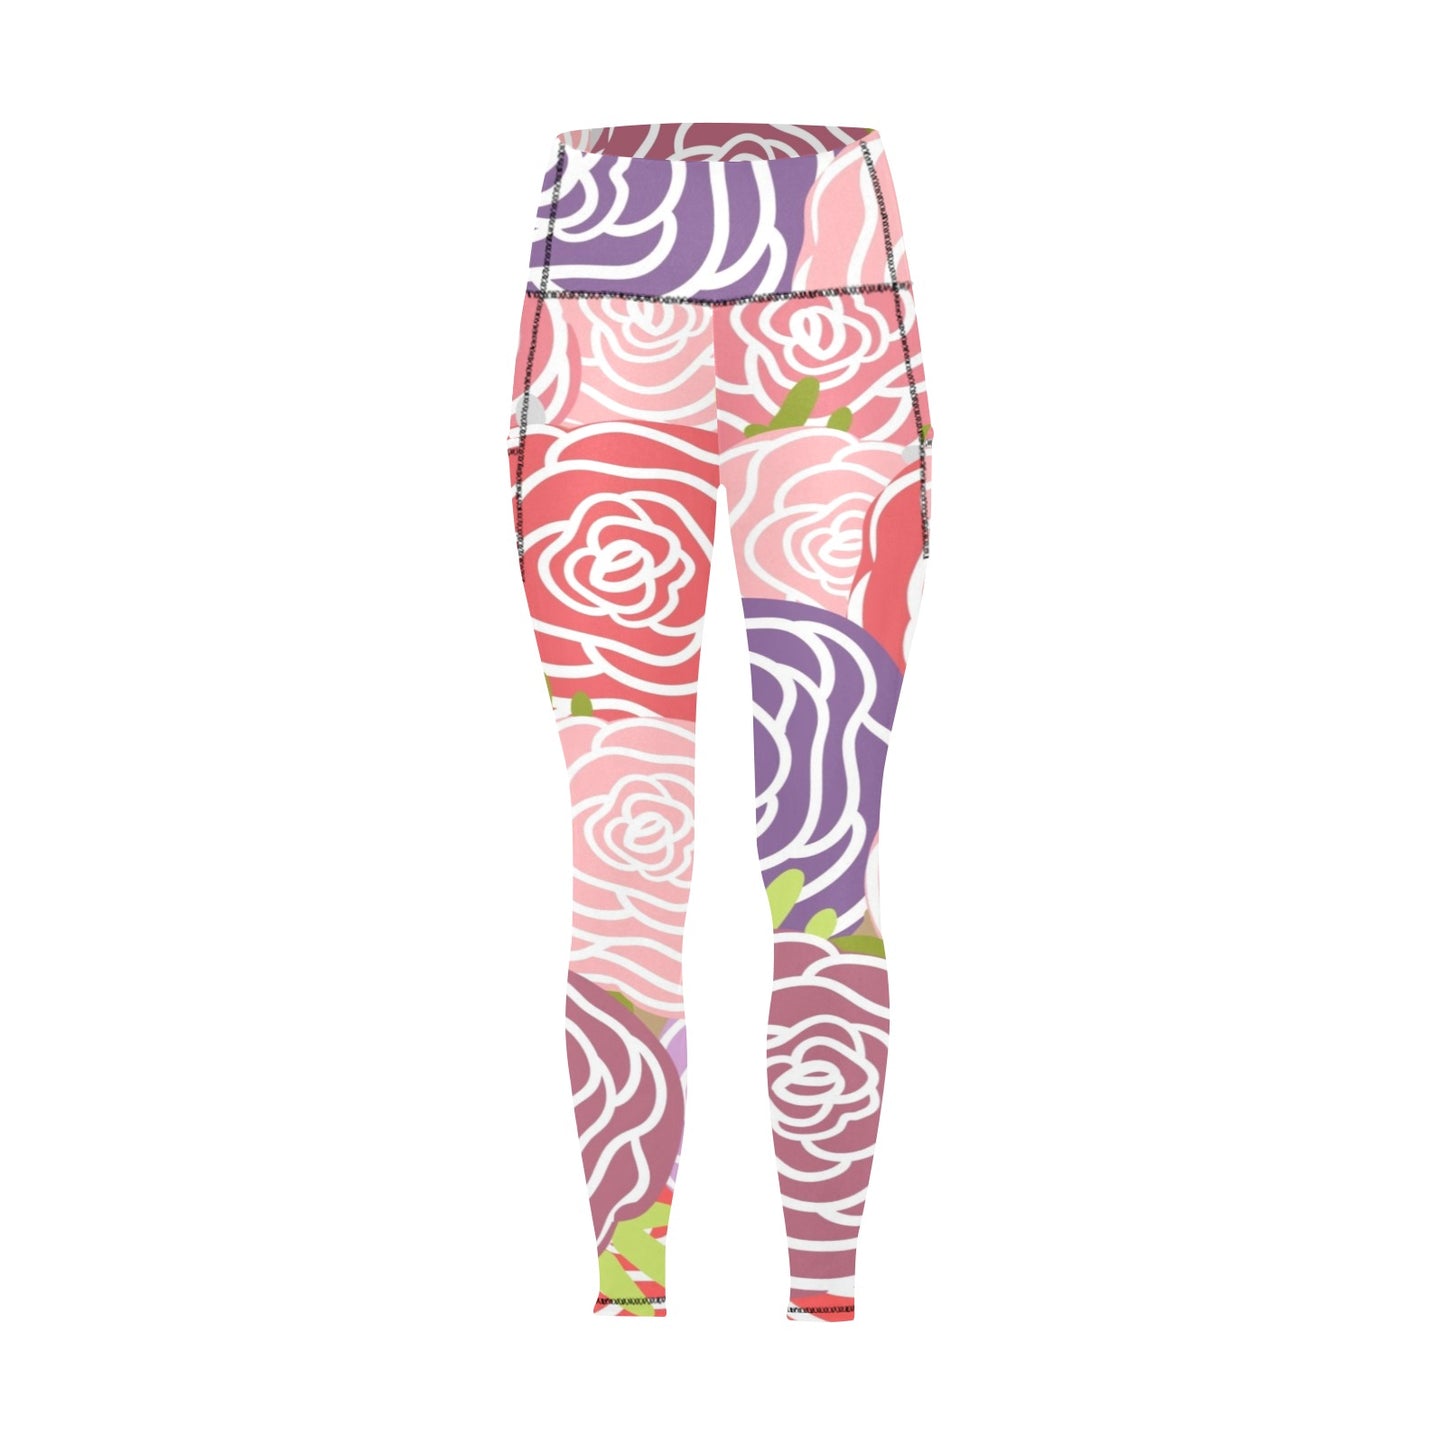 Abstract Roses - Women's Leggings with Pockets Women's Leggings with Pockets S - 2XL Plants